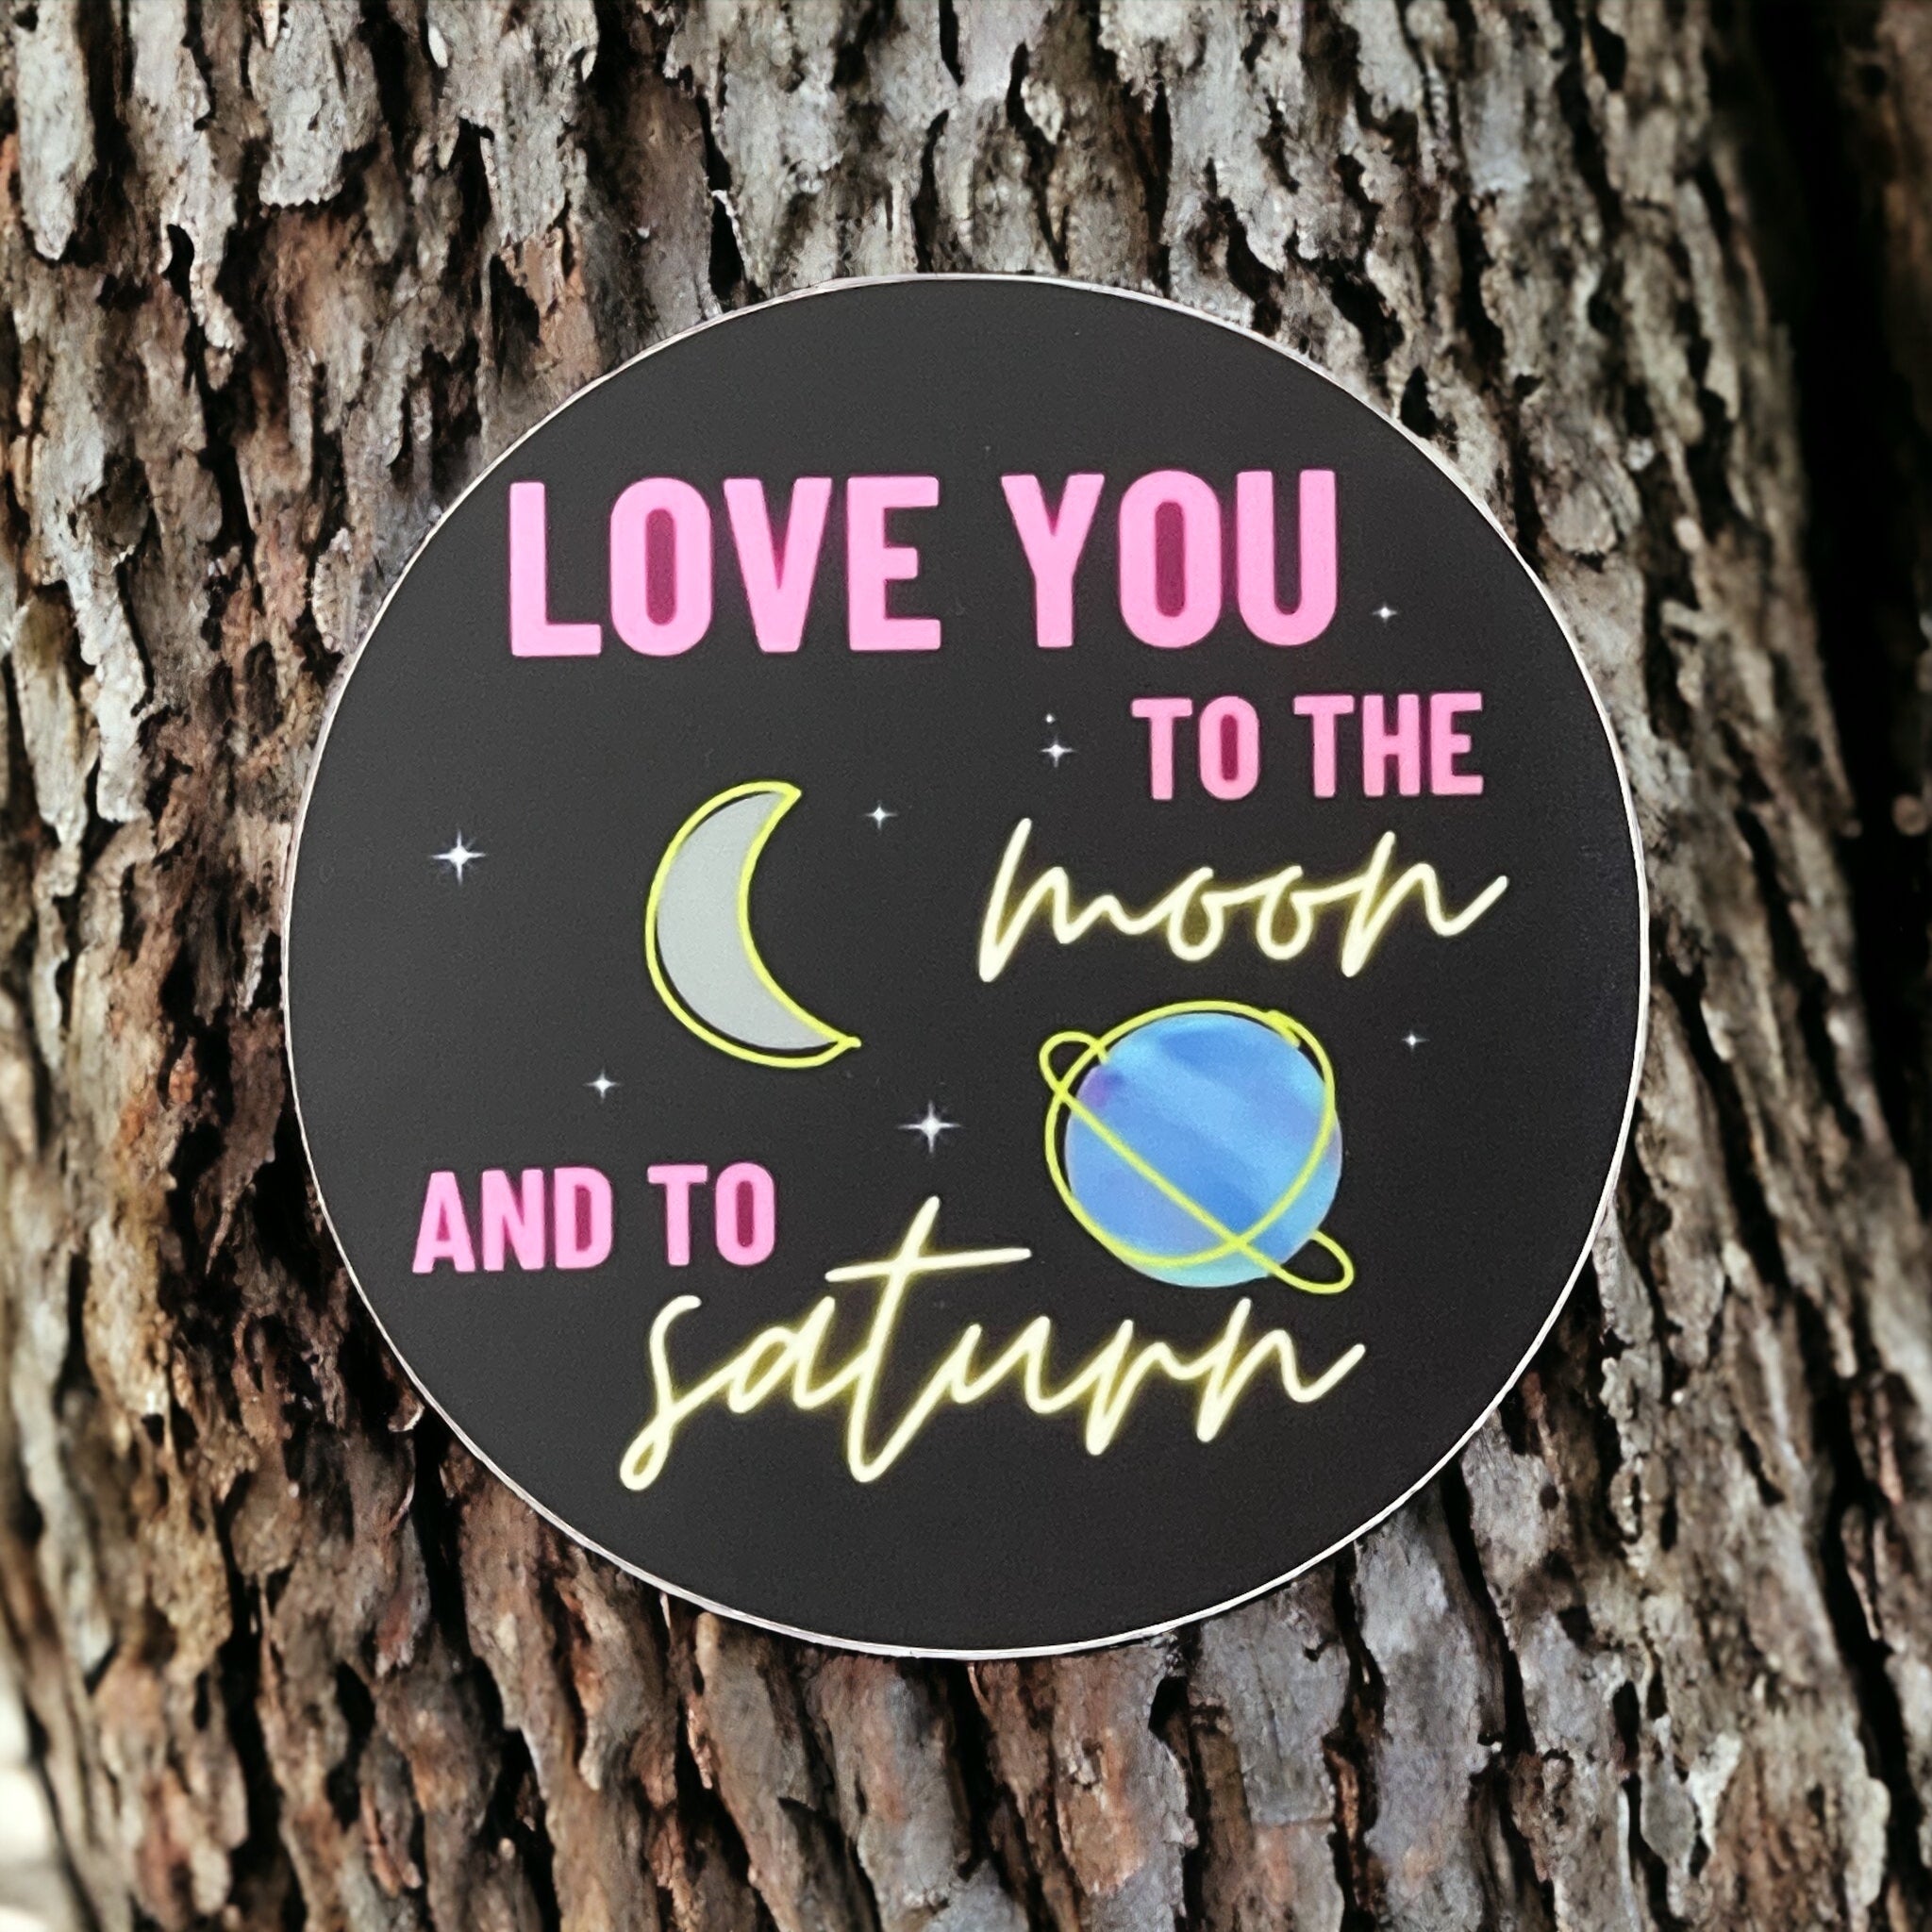 Vinyl Sticker - Love You to the Moon and to Saturn